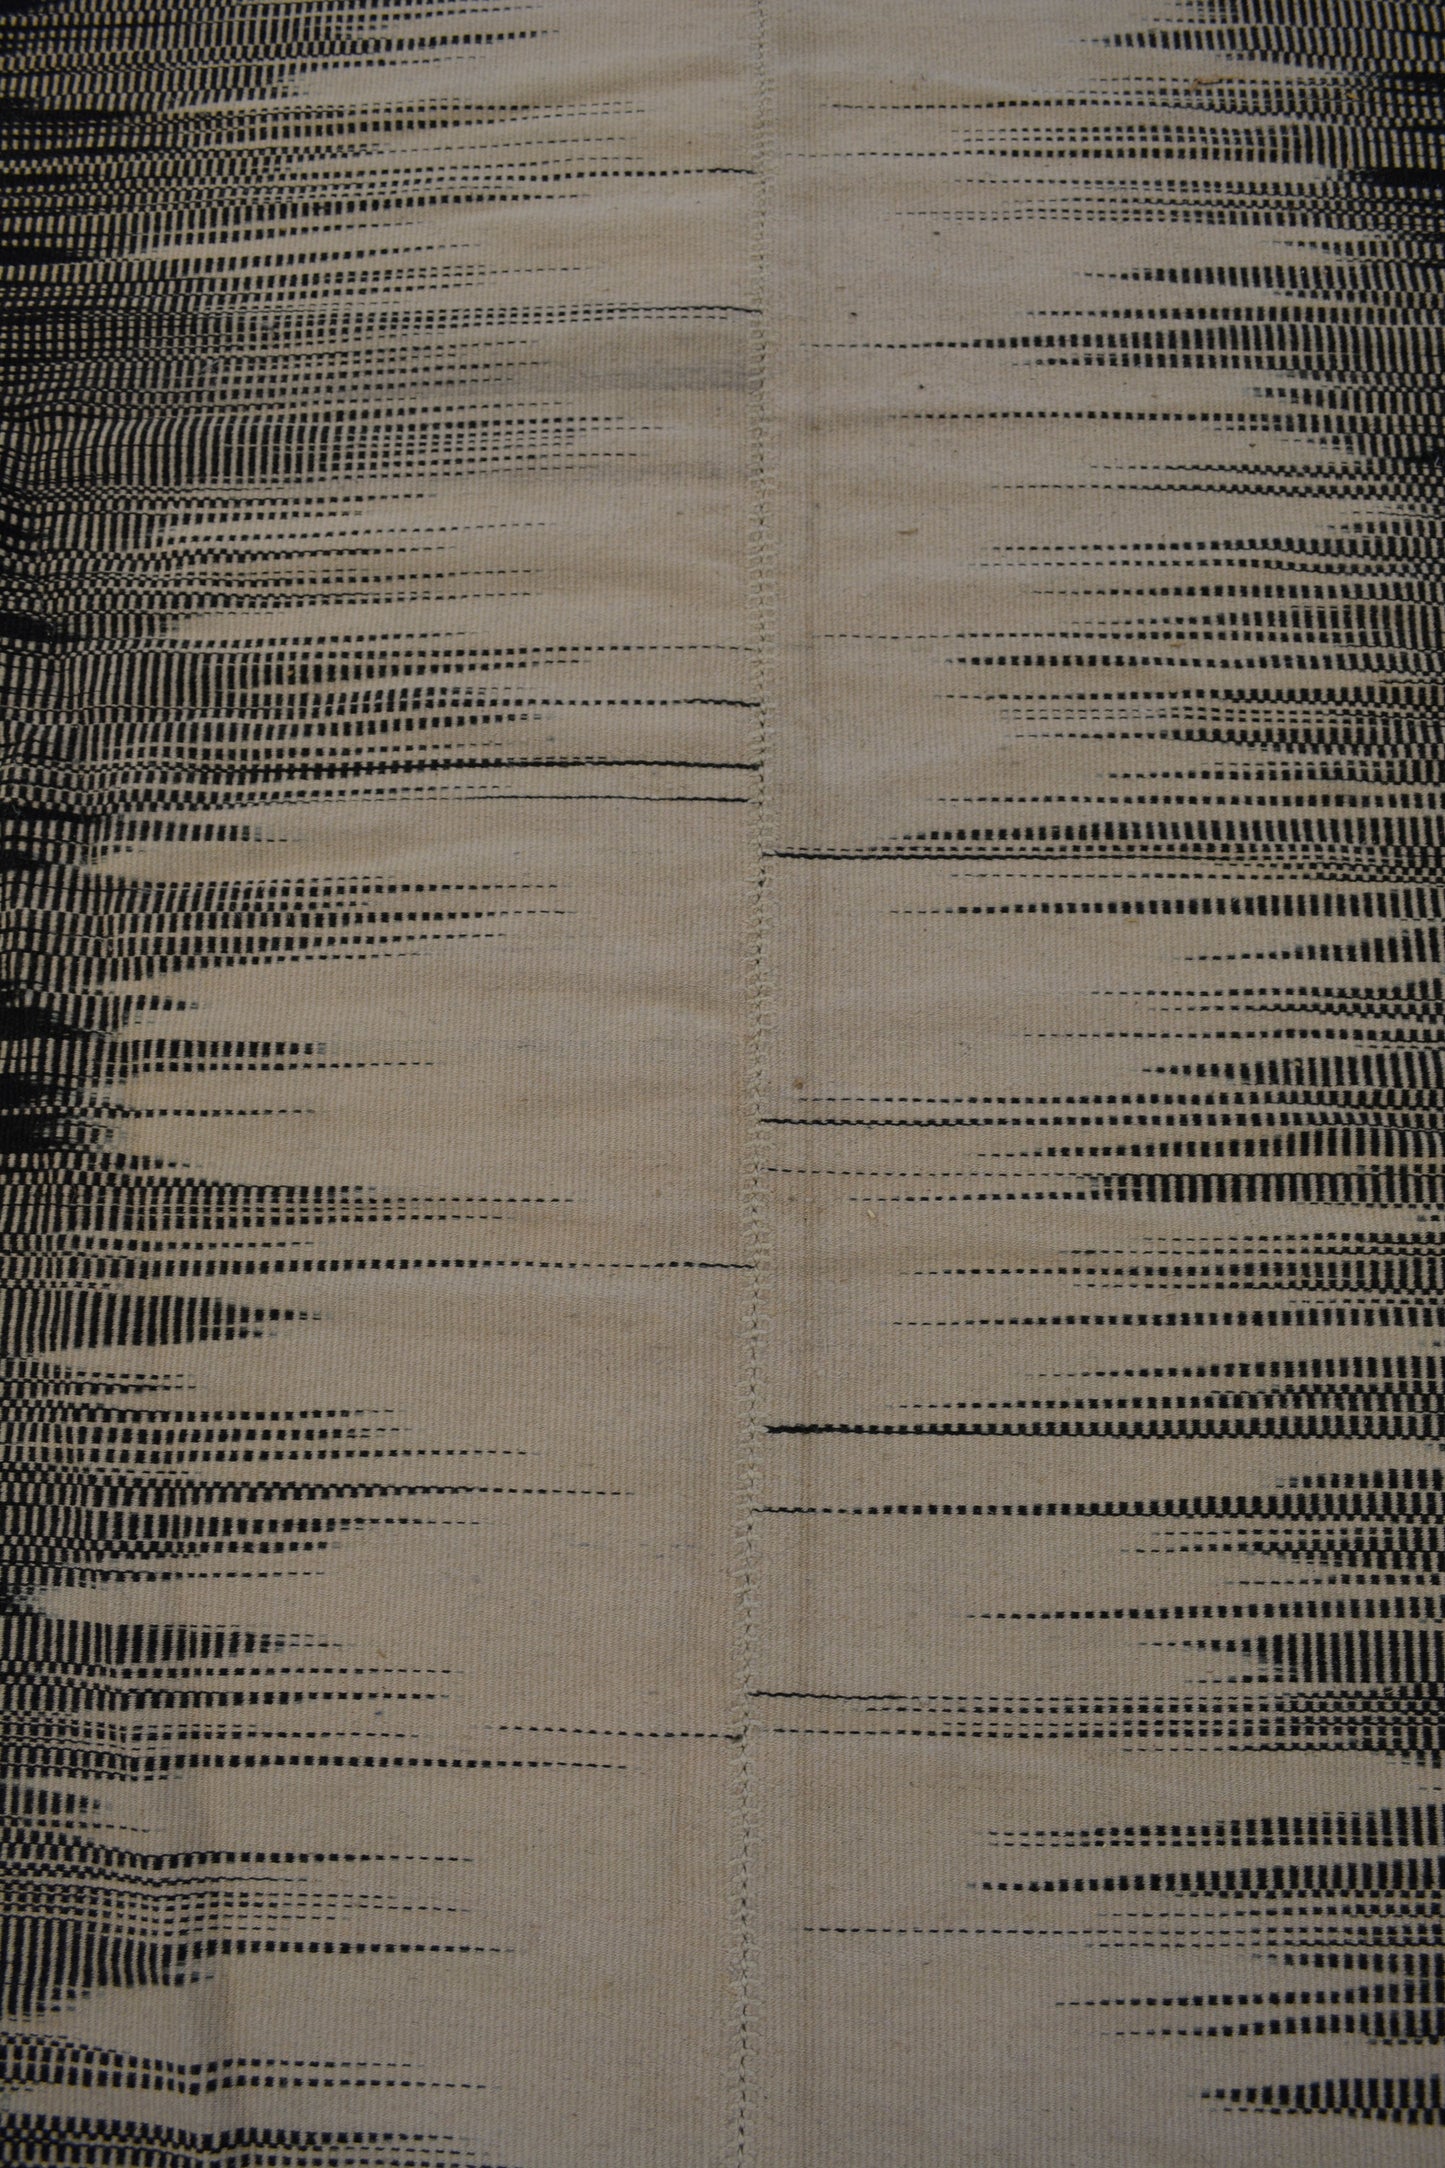 The rug's center renders in beige with frequencies coming from both sides.